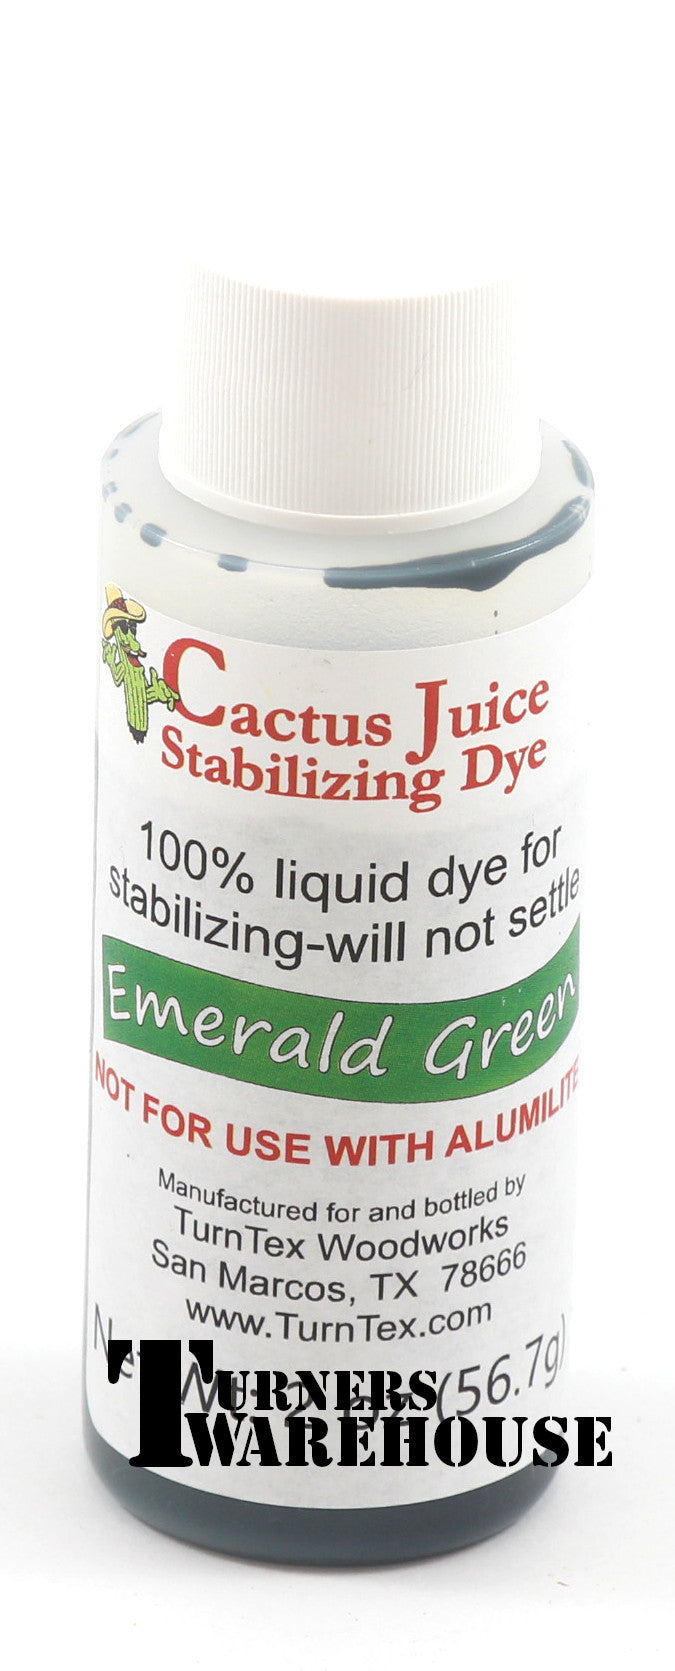 Extreme Pink Cactus Juice Stabilizing Dye 2 oz Net Weight by Turntex Woodworks